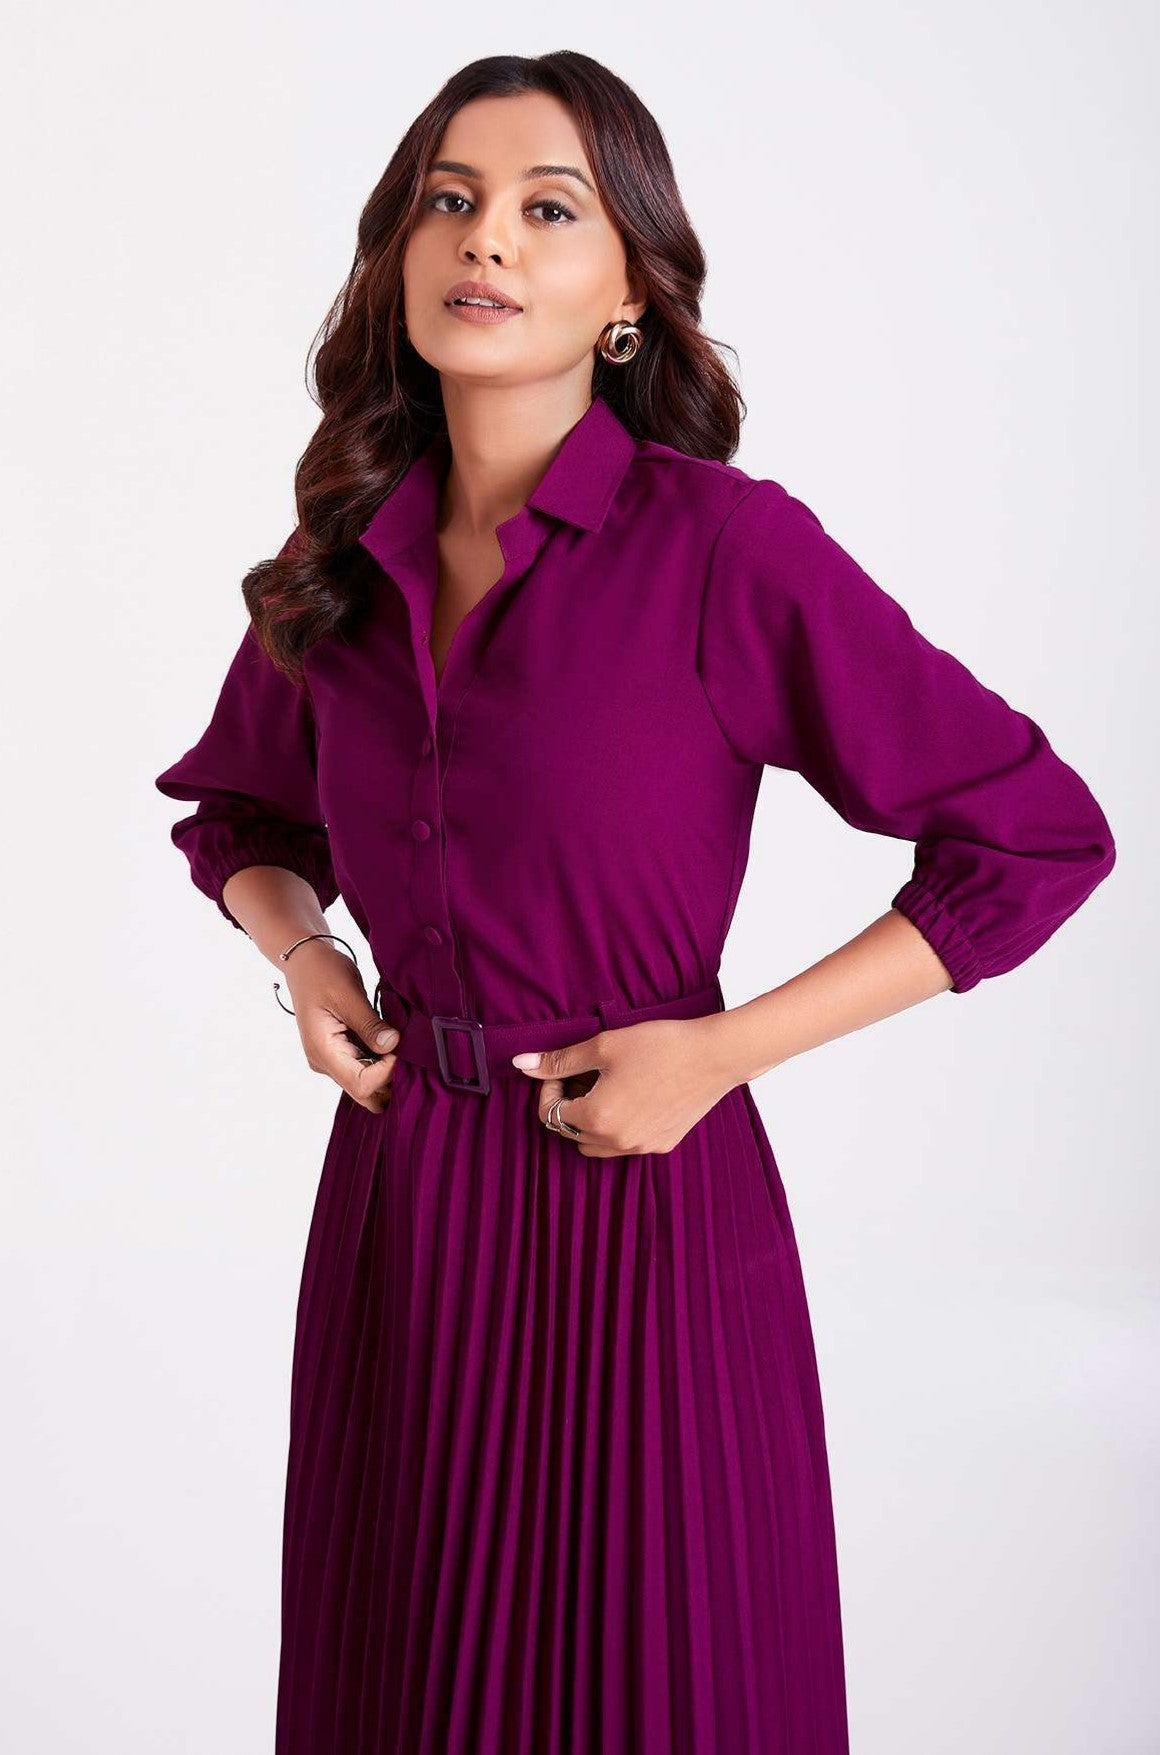 The model in the image is wearing Purple Pan Collar Pleated Western Wear dress for women from Alice Milan. Crafted with the finest materials and impeccable attention to detail, the Dress looks premium, trendy, luxurious and offers unparalleled comfort. It’s a perfect clothing option for loungewear, resort wear, party wear or for an airport look. The woman in the image looks happy, and confident with her style statement putting a happy smile on her face.